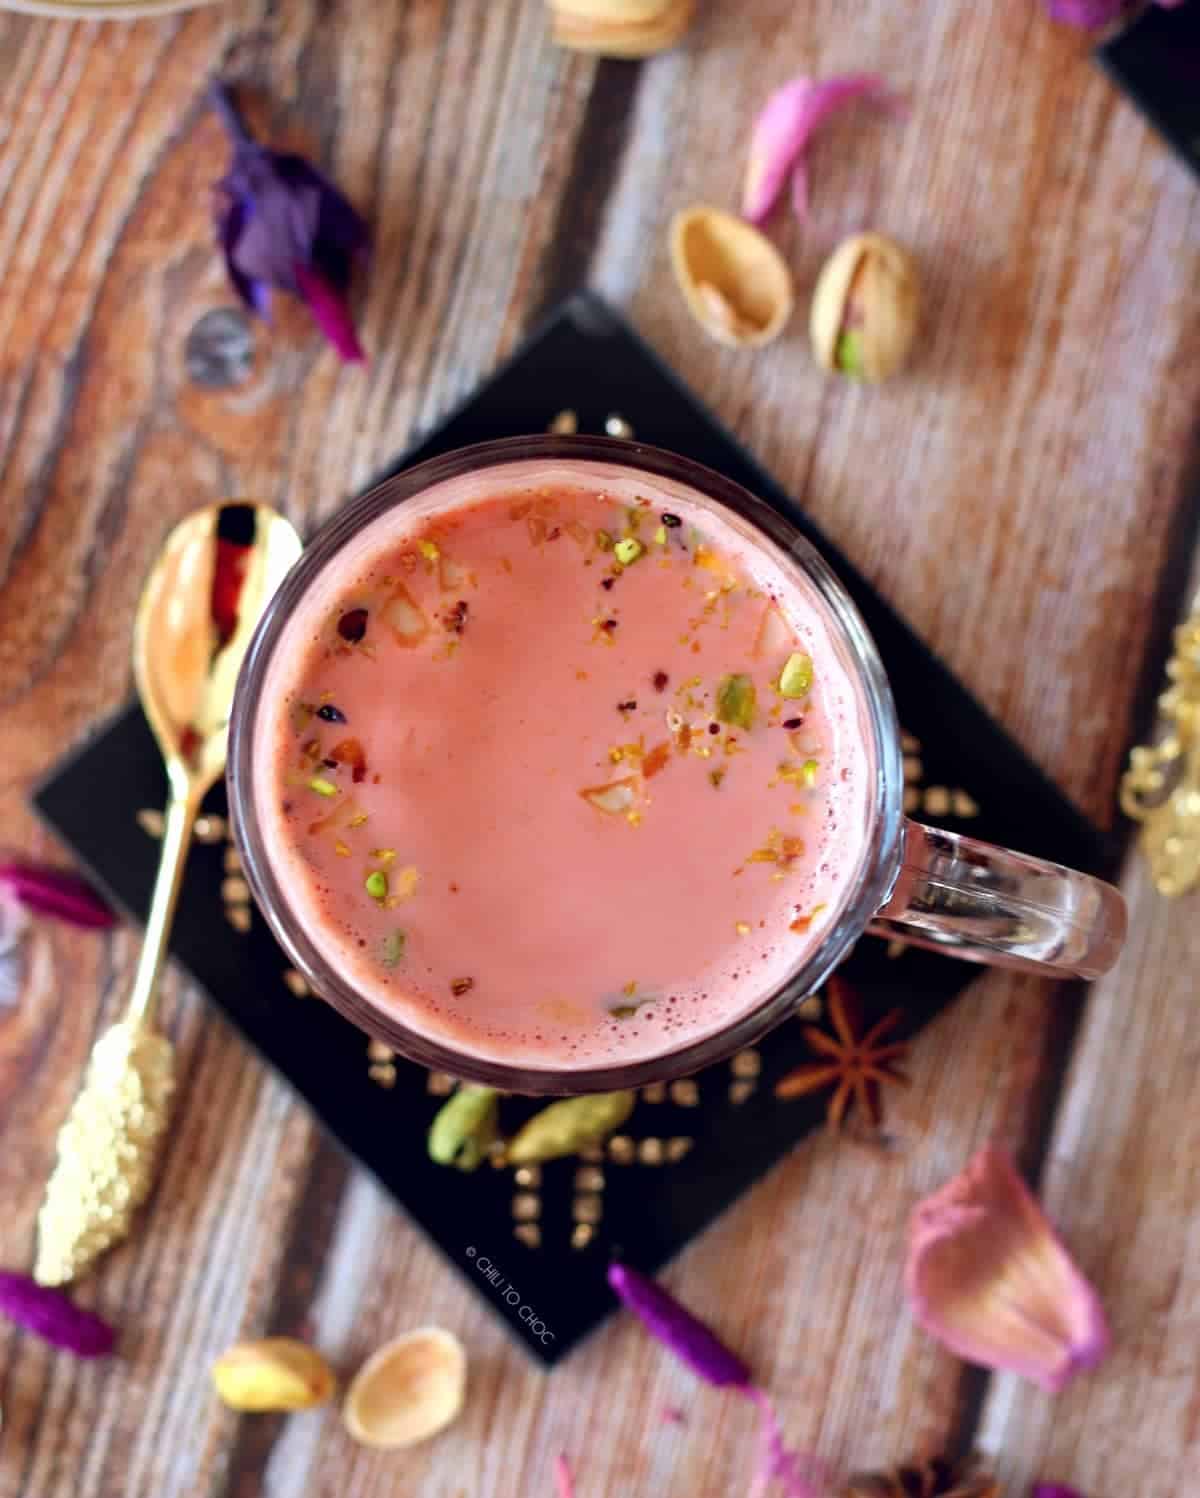 Top view of the pink tea with gold spoon on the side